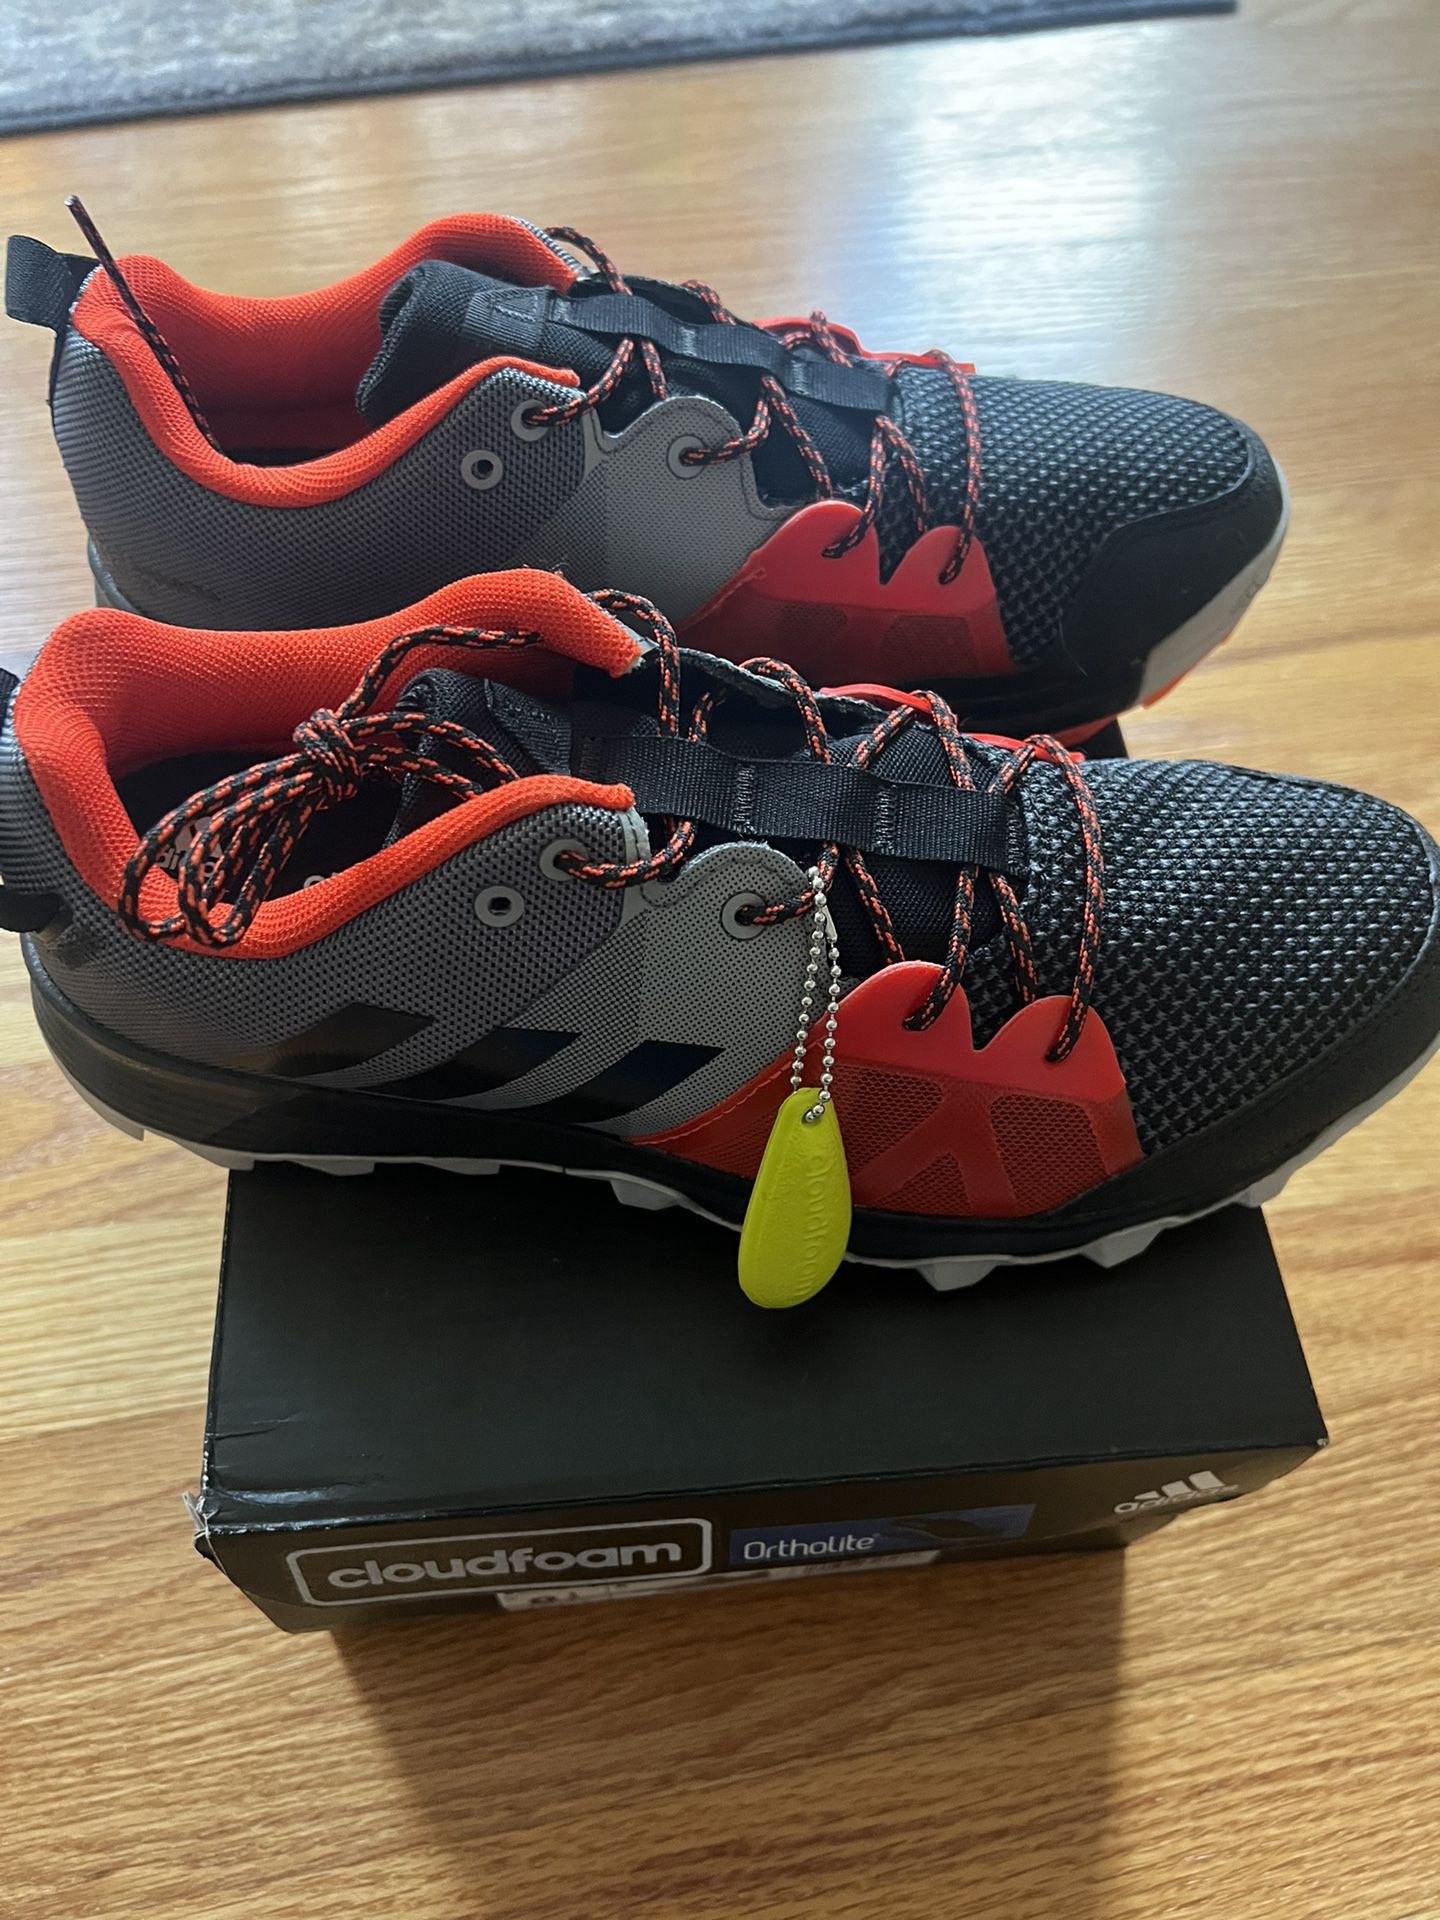 NEW Men Ortholitr Kanadia 8.1 TR Trail Hiking Casual Shoes Size 8.5 for Sale in Wolcott, - OfferUp